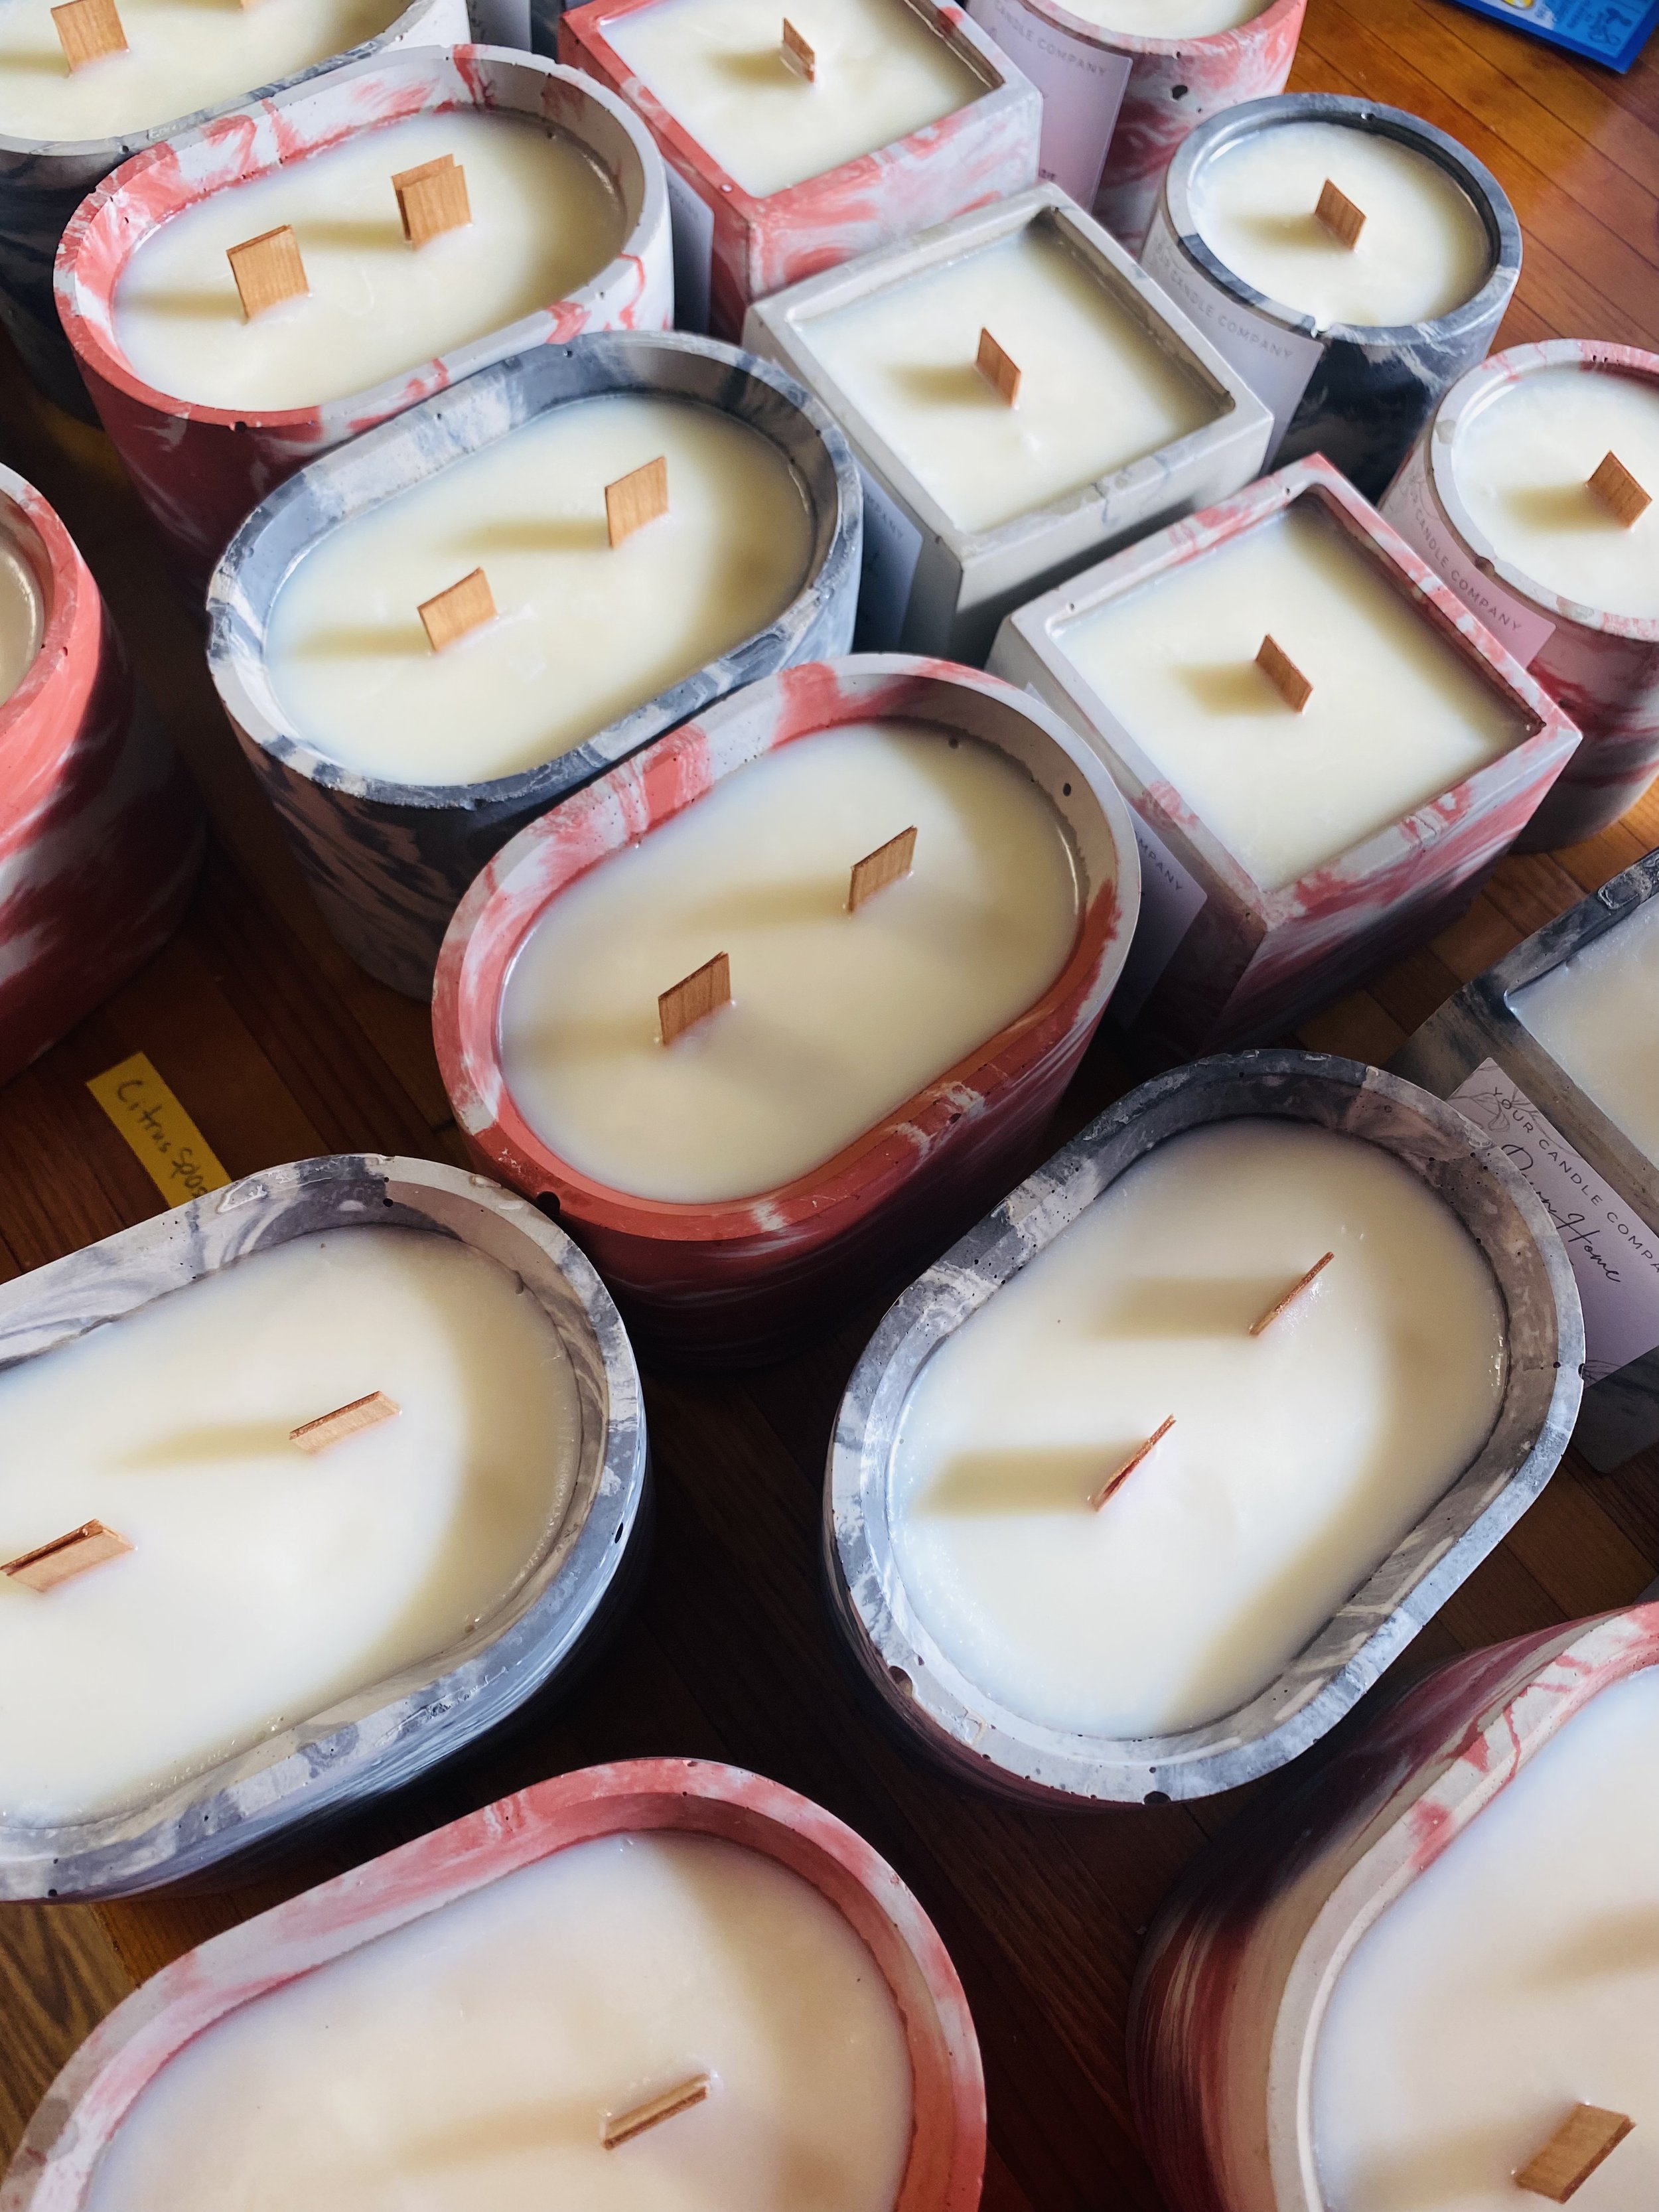 Whats the best wax to use when starting to make candles? 